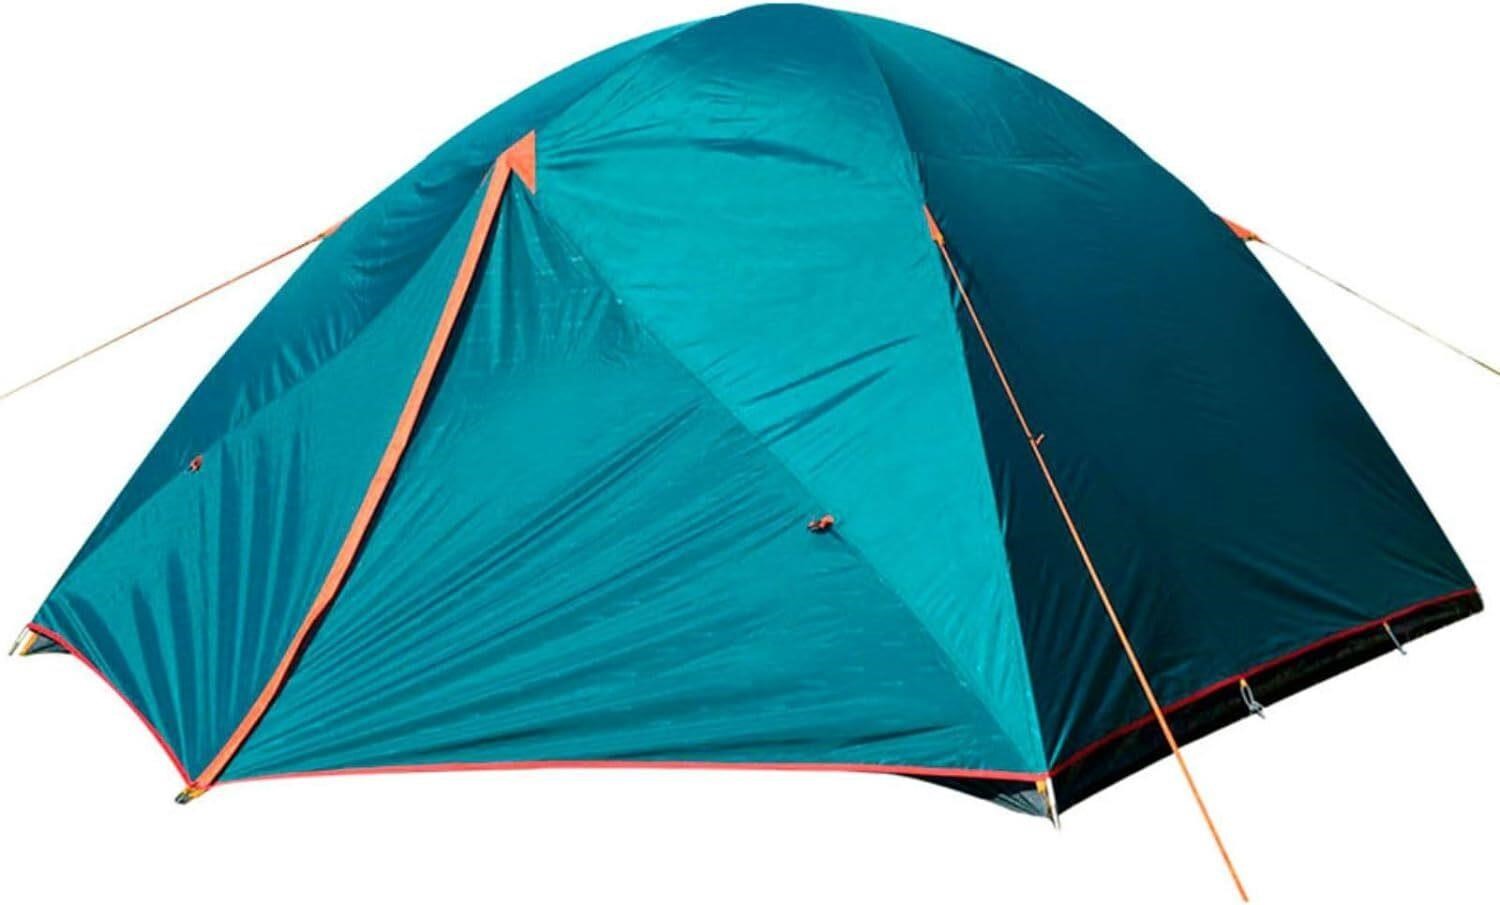 NTK Colorado GT 6 Person Camping Tent - Teal.